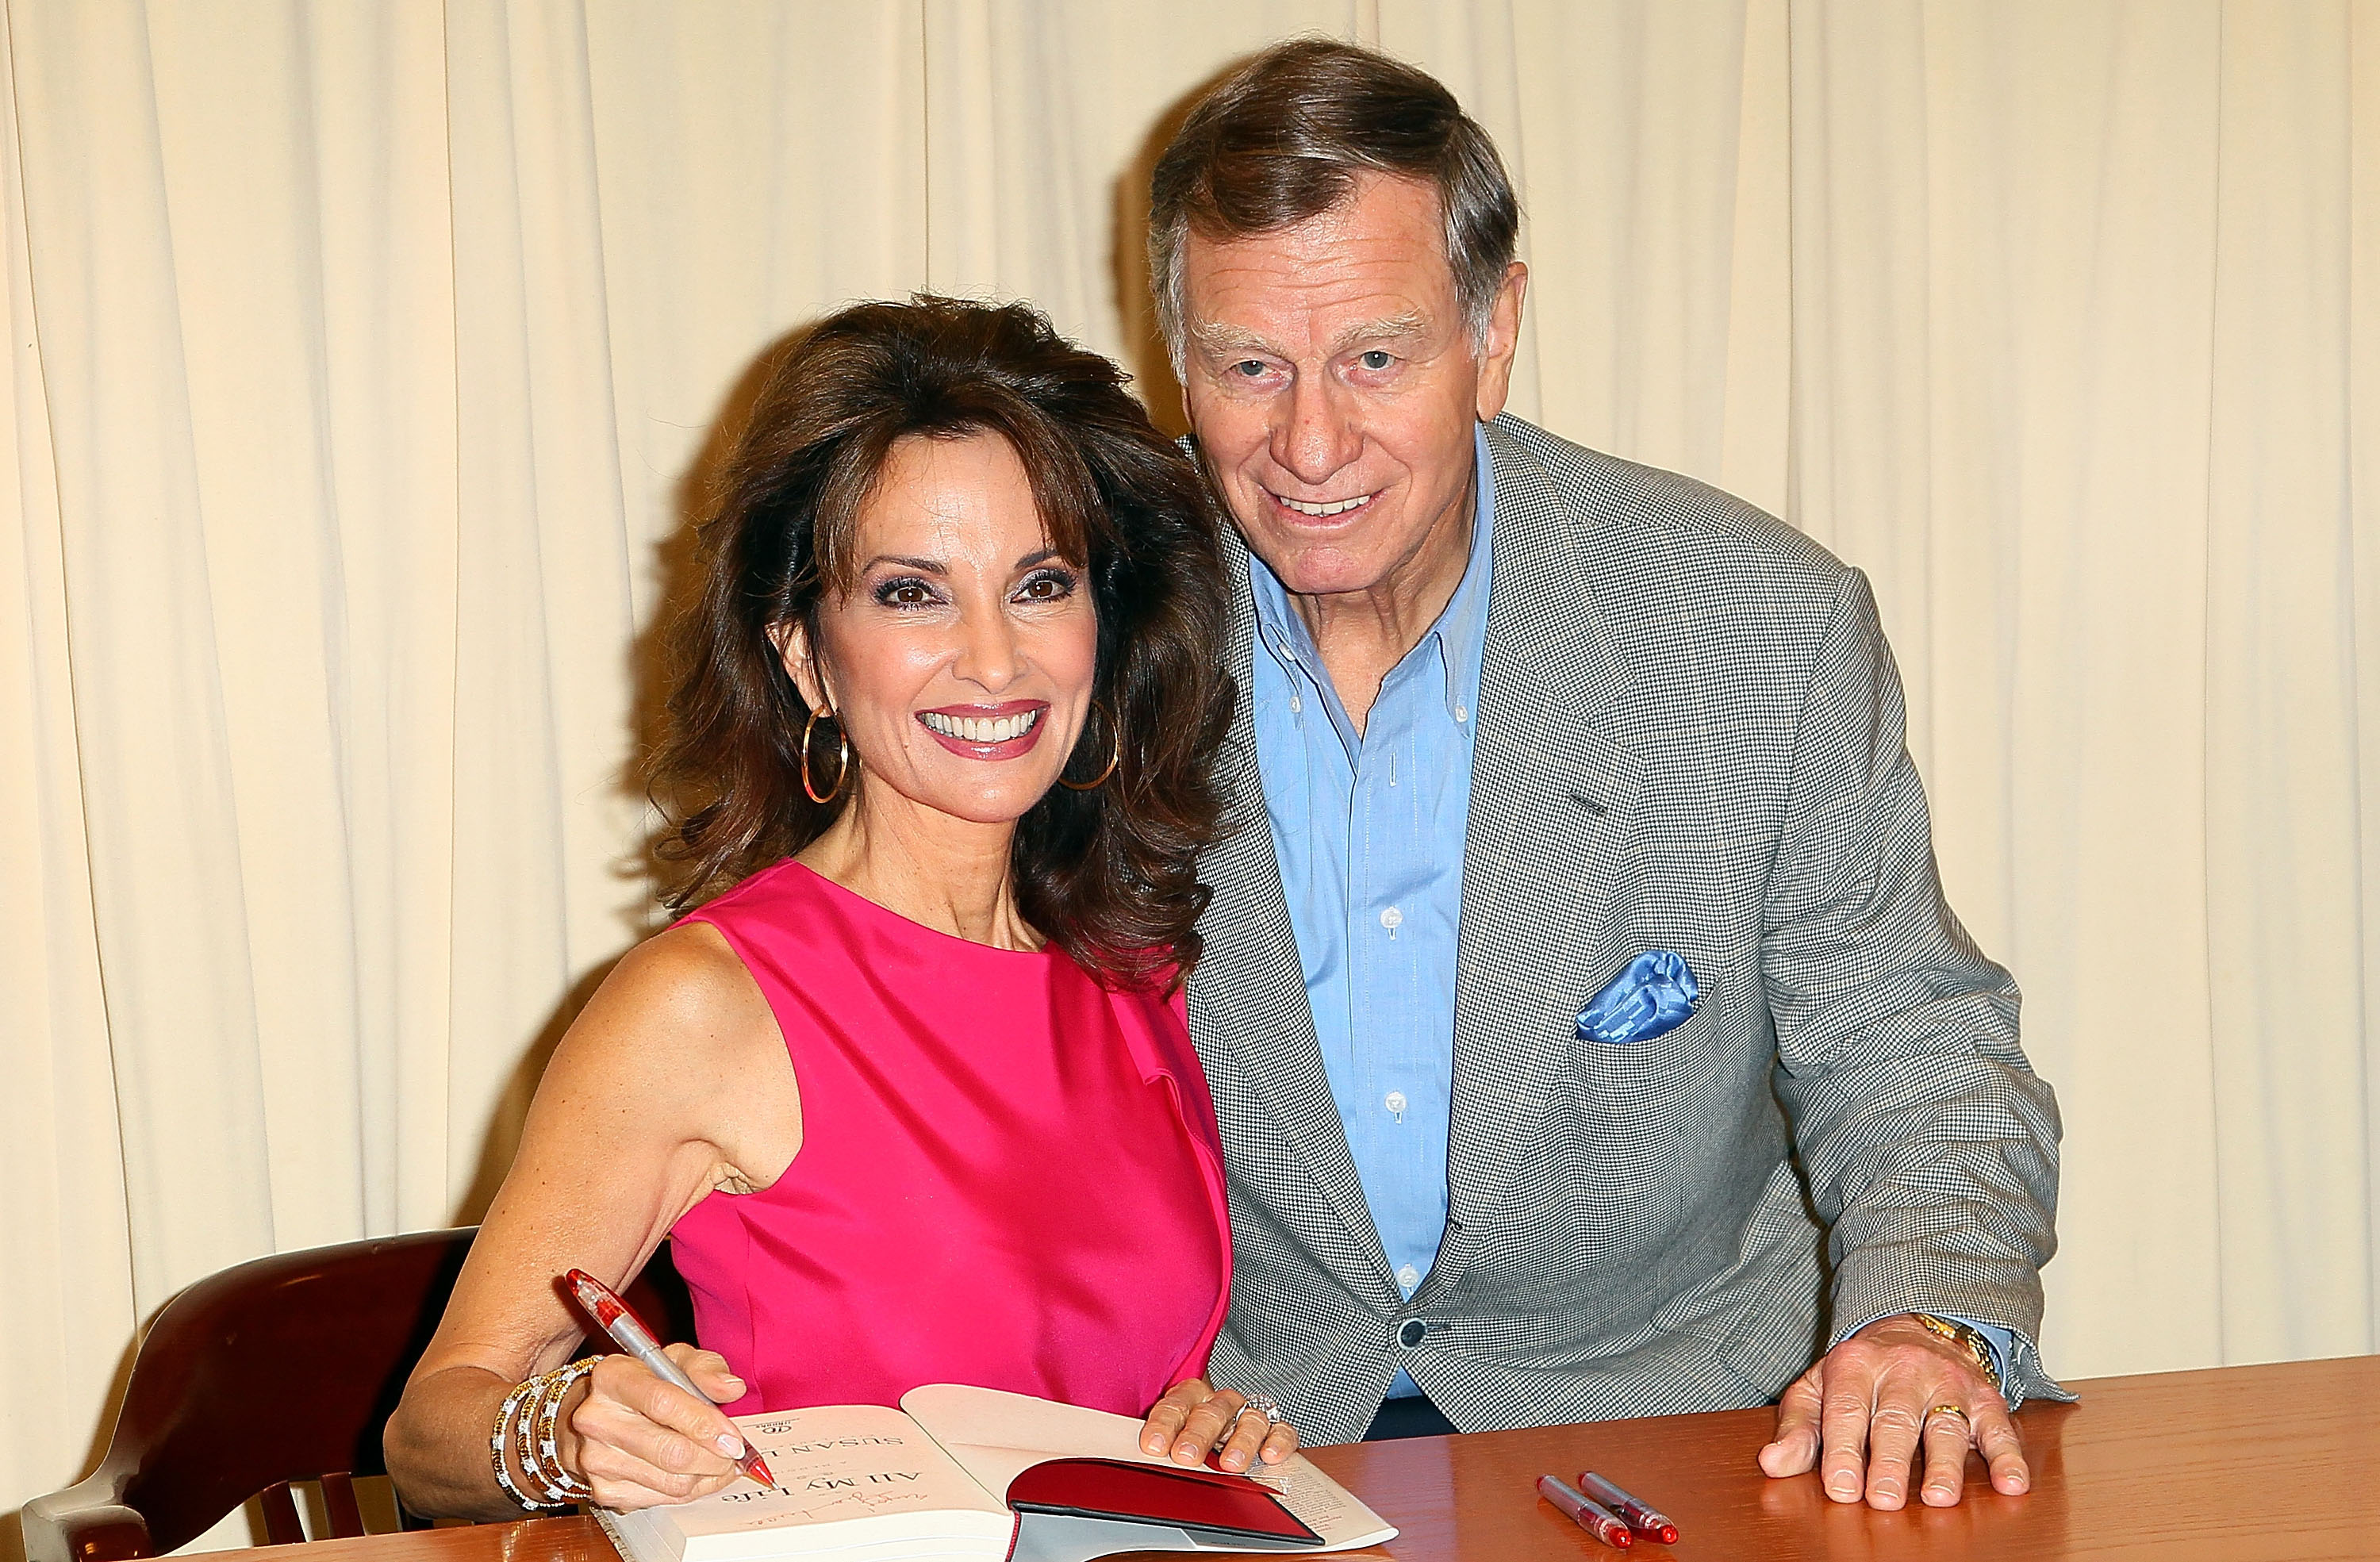 Susan Lucci and her husband, Helmut Huber, signs copies of "All My Life: A Memoir" at Barnes & Noble, 5th Avenue, on March 29, 2011, in New York City. | Source: Getty Images